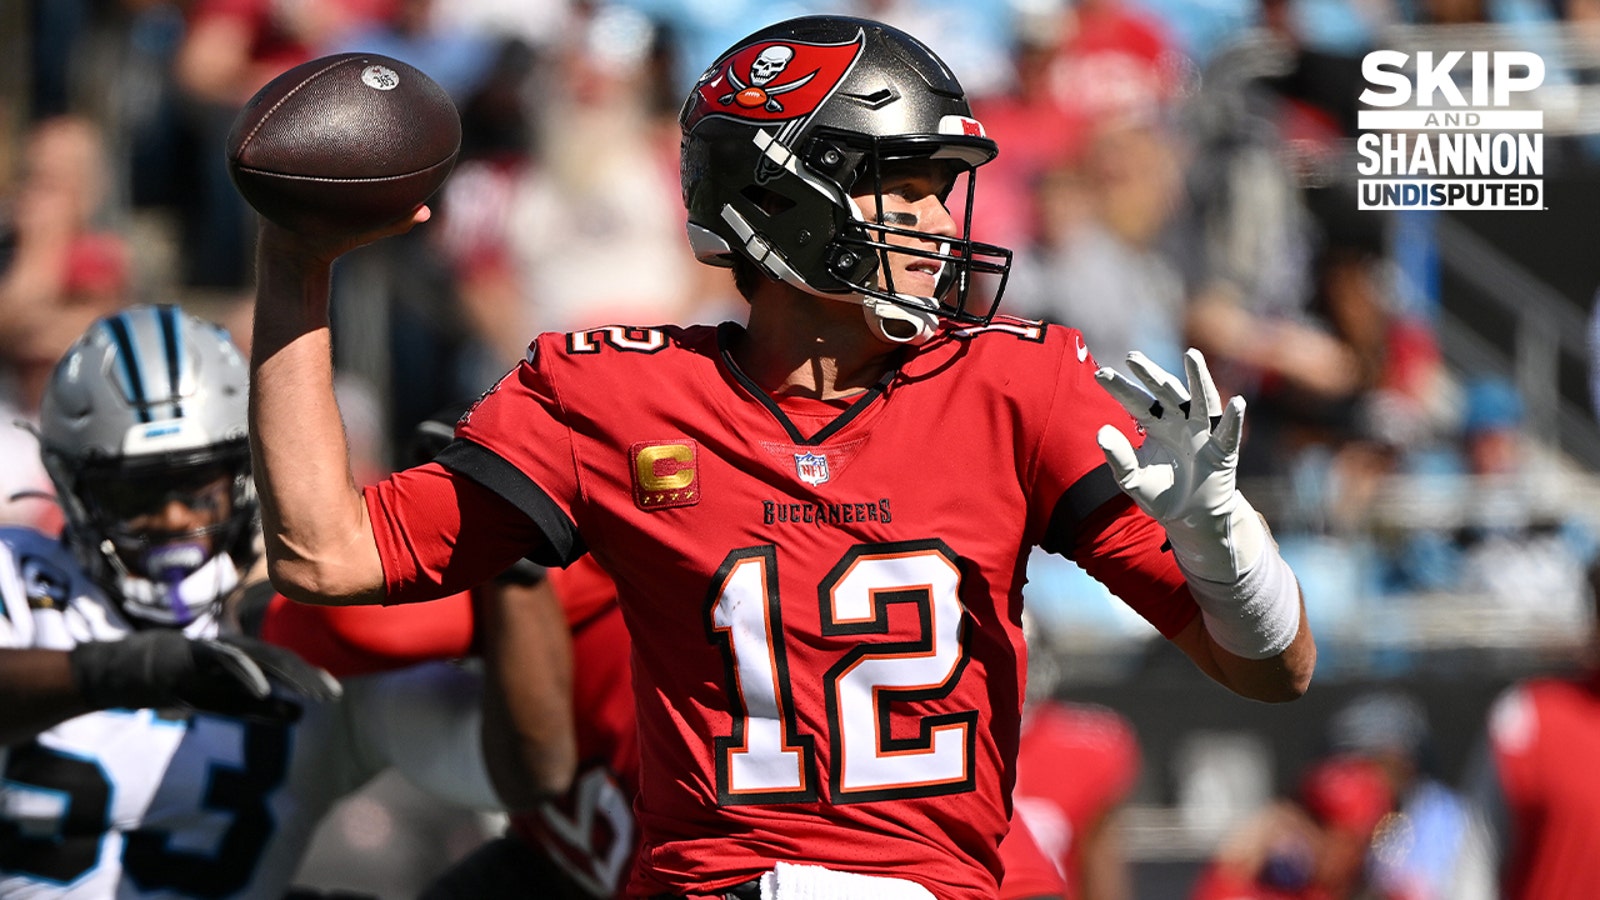 Tom Brady's Bucs embarrassed 21-6 by Panthers in Week 7